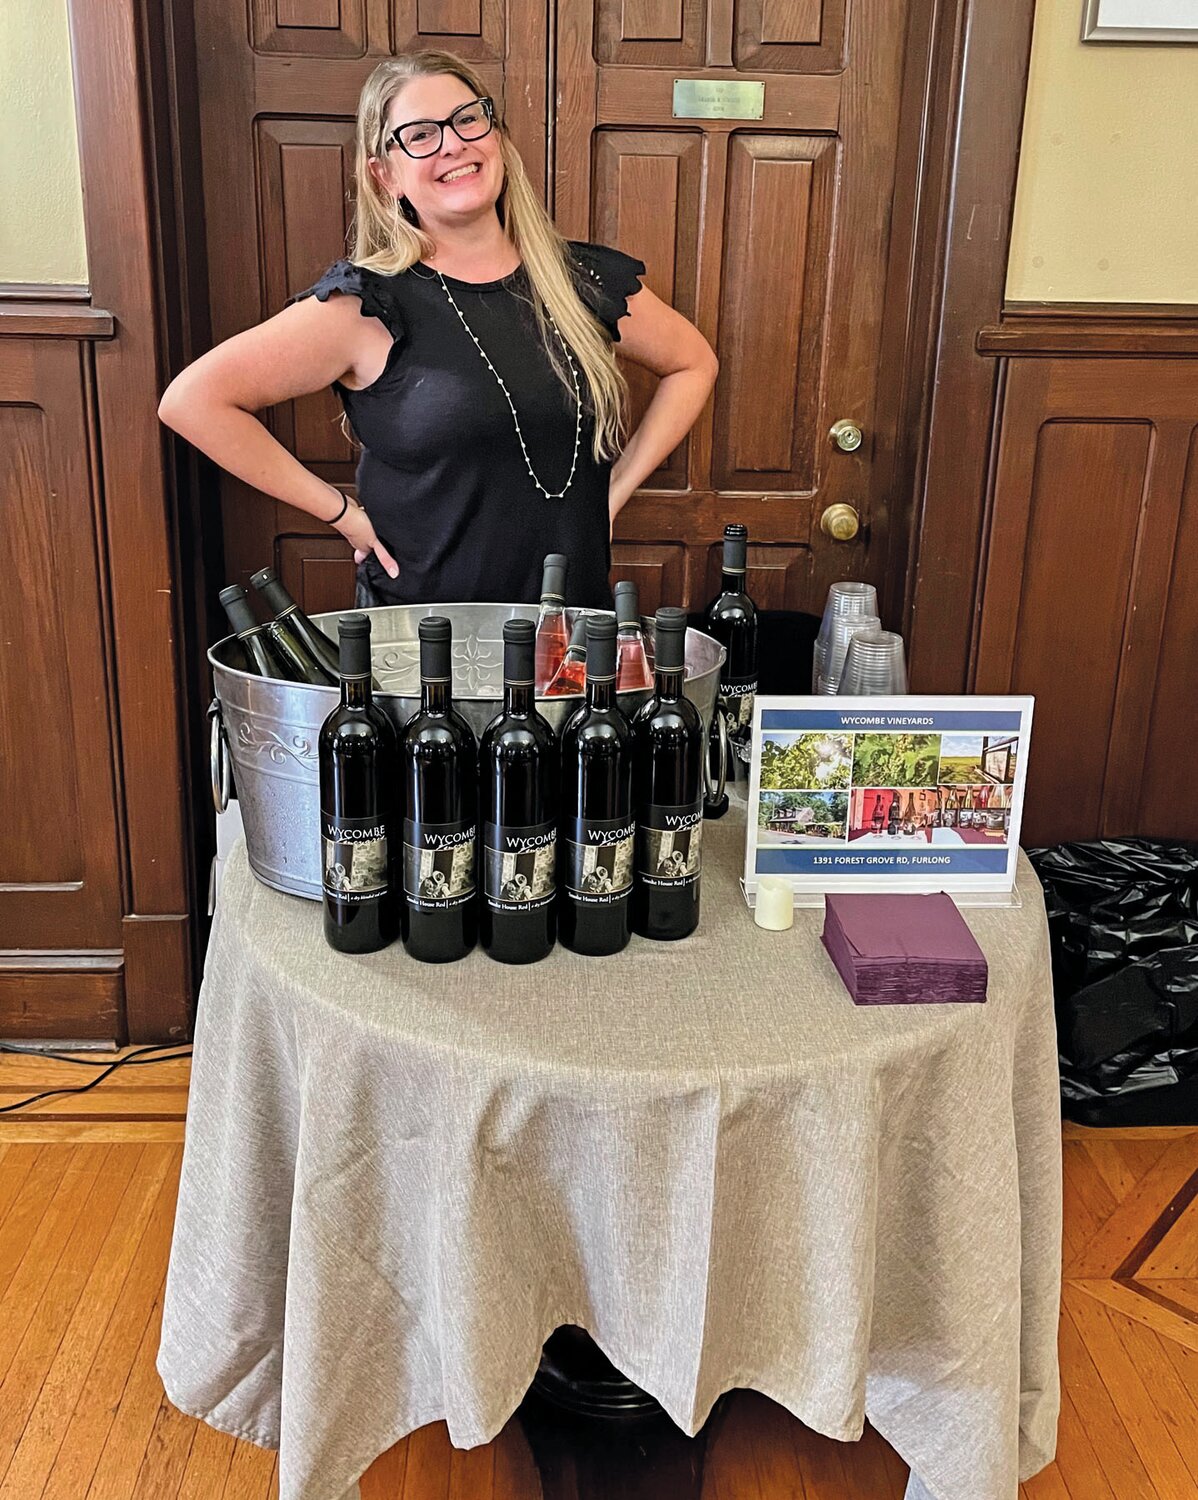 Lyndsay Williams of Wycombe Winery was on hand to offer guests samples of the vineyard’s wines at the Wine & Art Trail Exhibition at Freeman Hall.